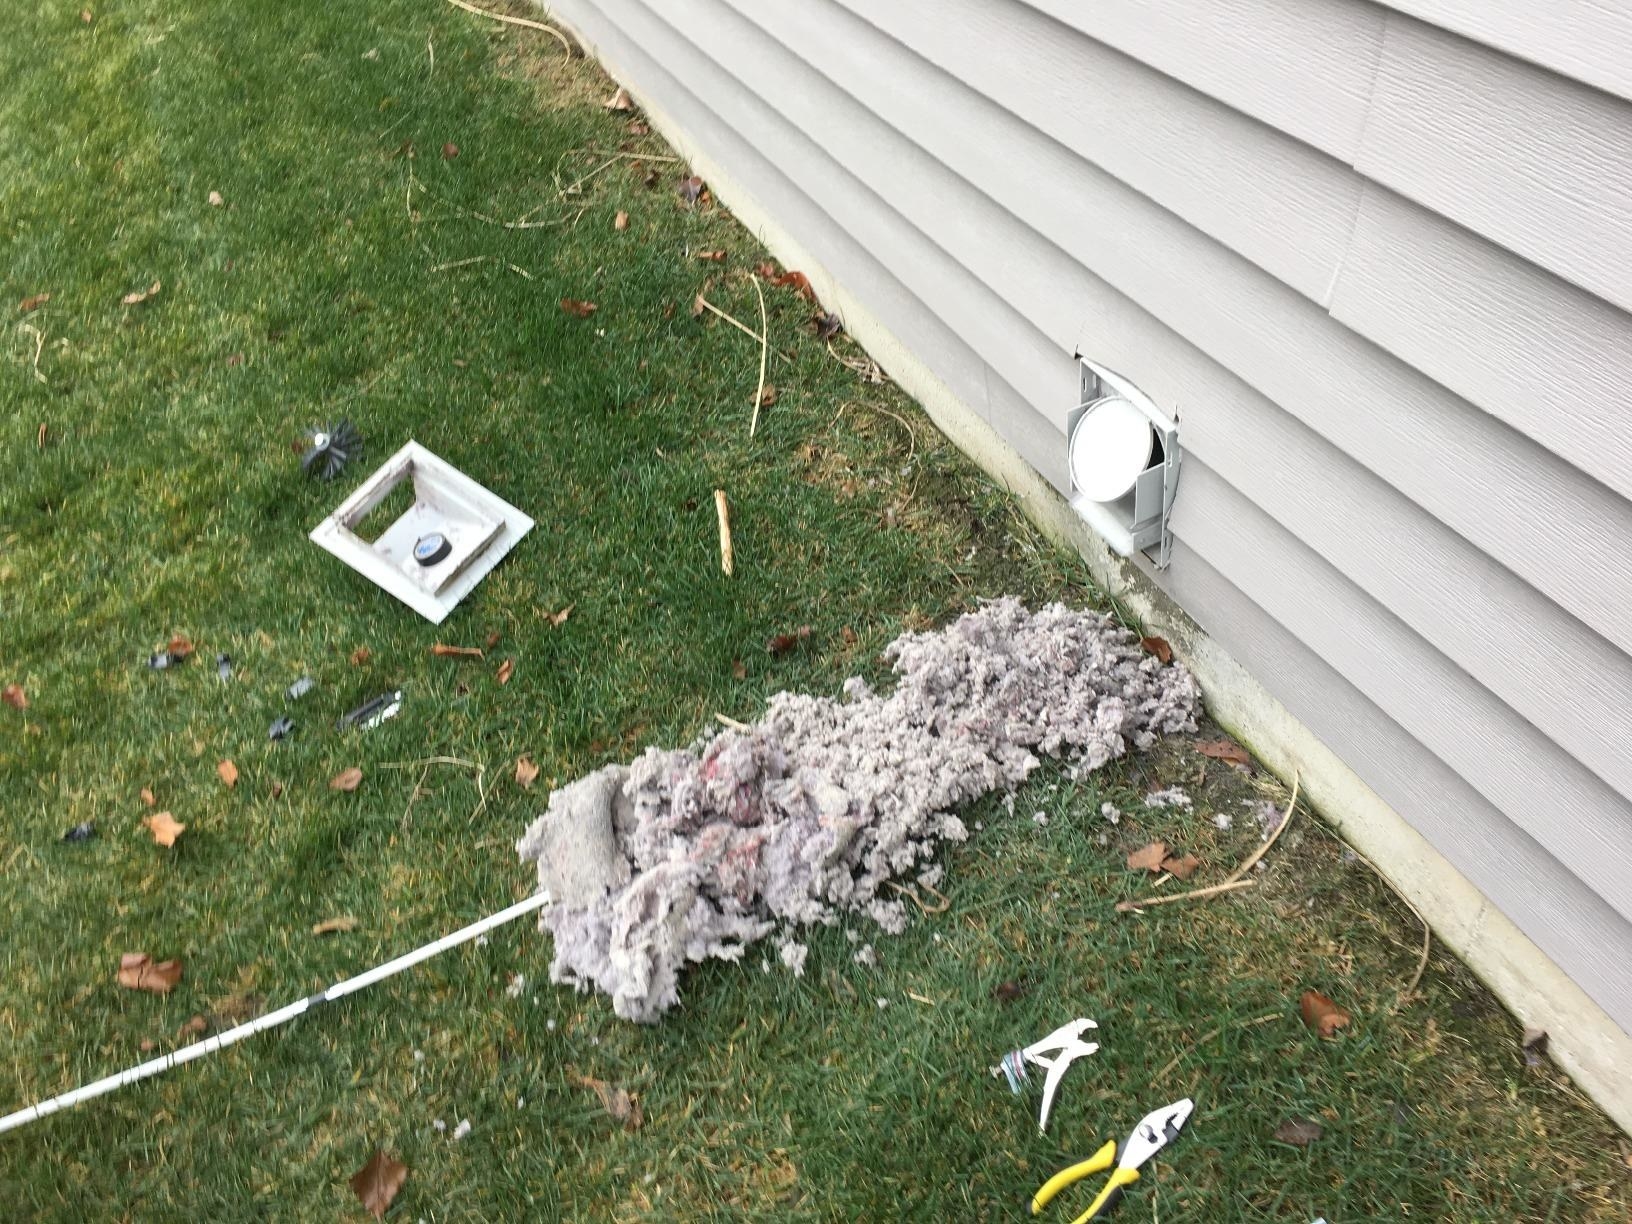 Reviewer image of heap of dryer lint outside of house on grass